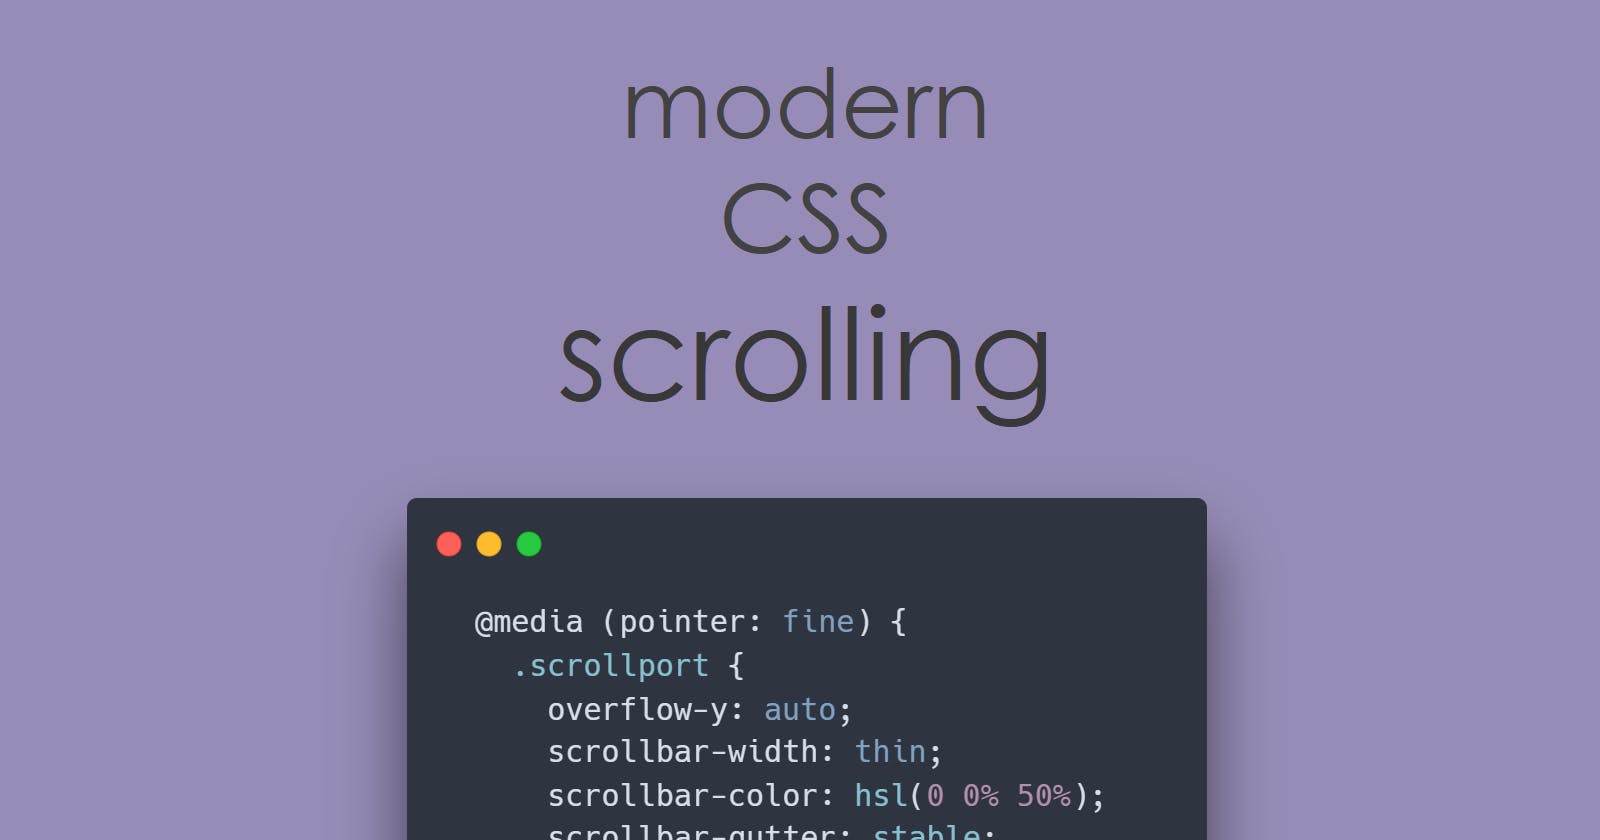 Enable scrolling for modal